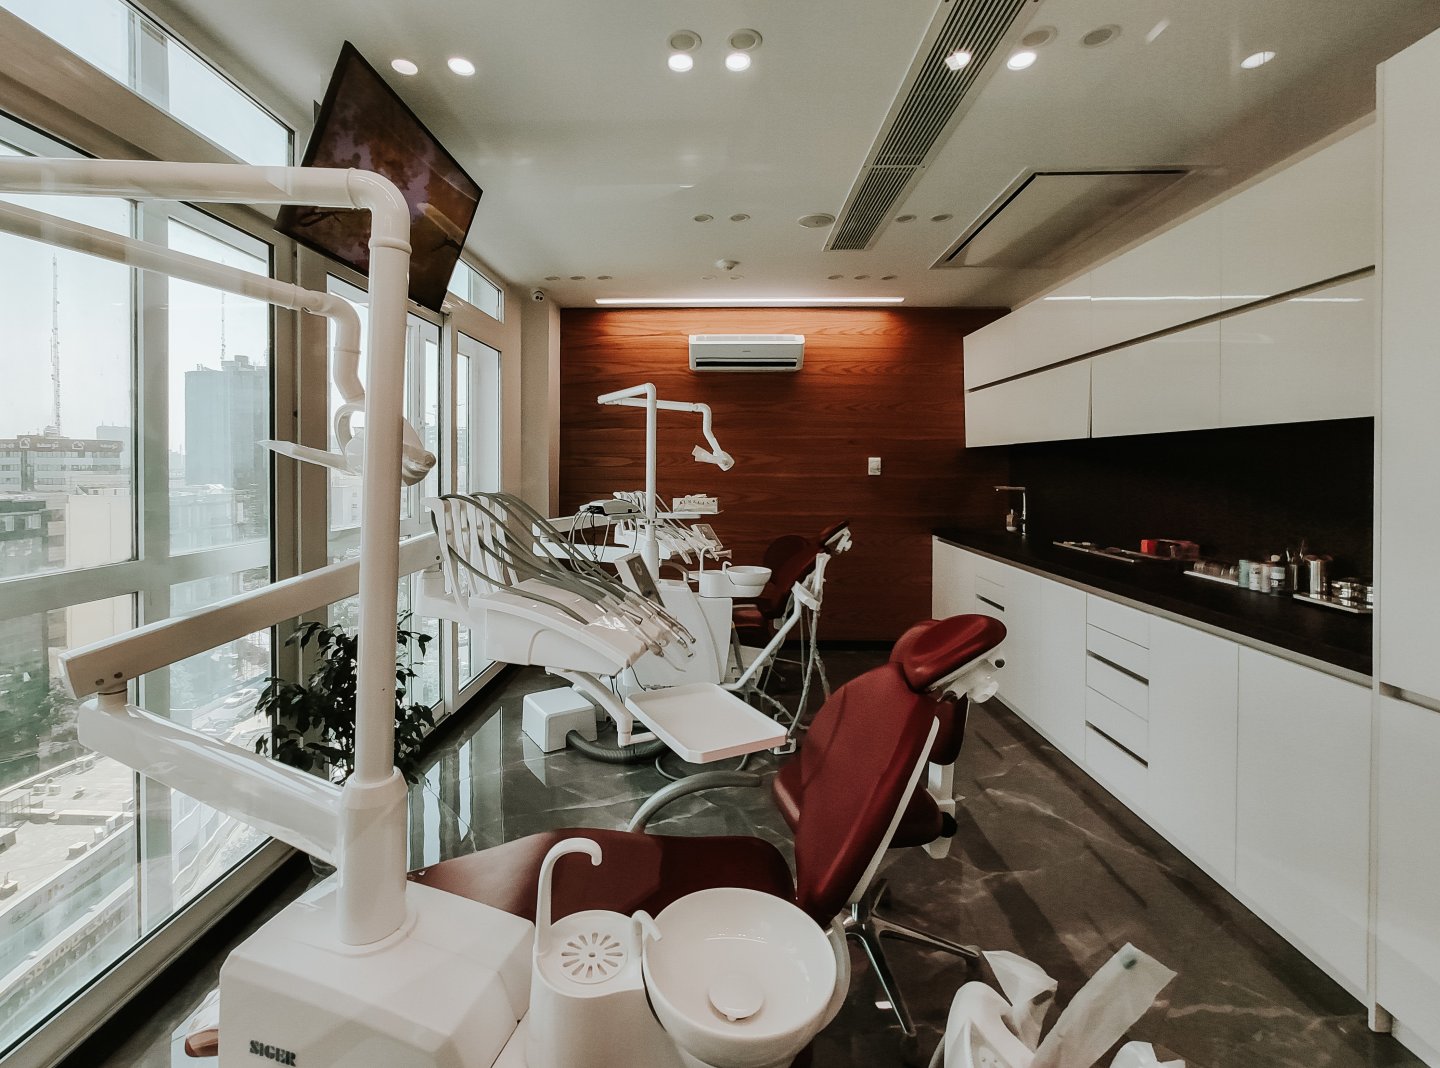 A dentist’s office with multiple chairs near a window